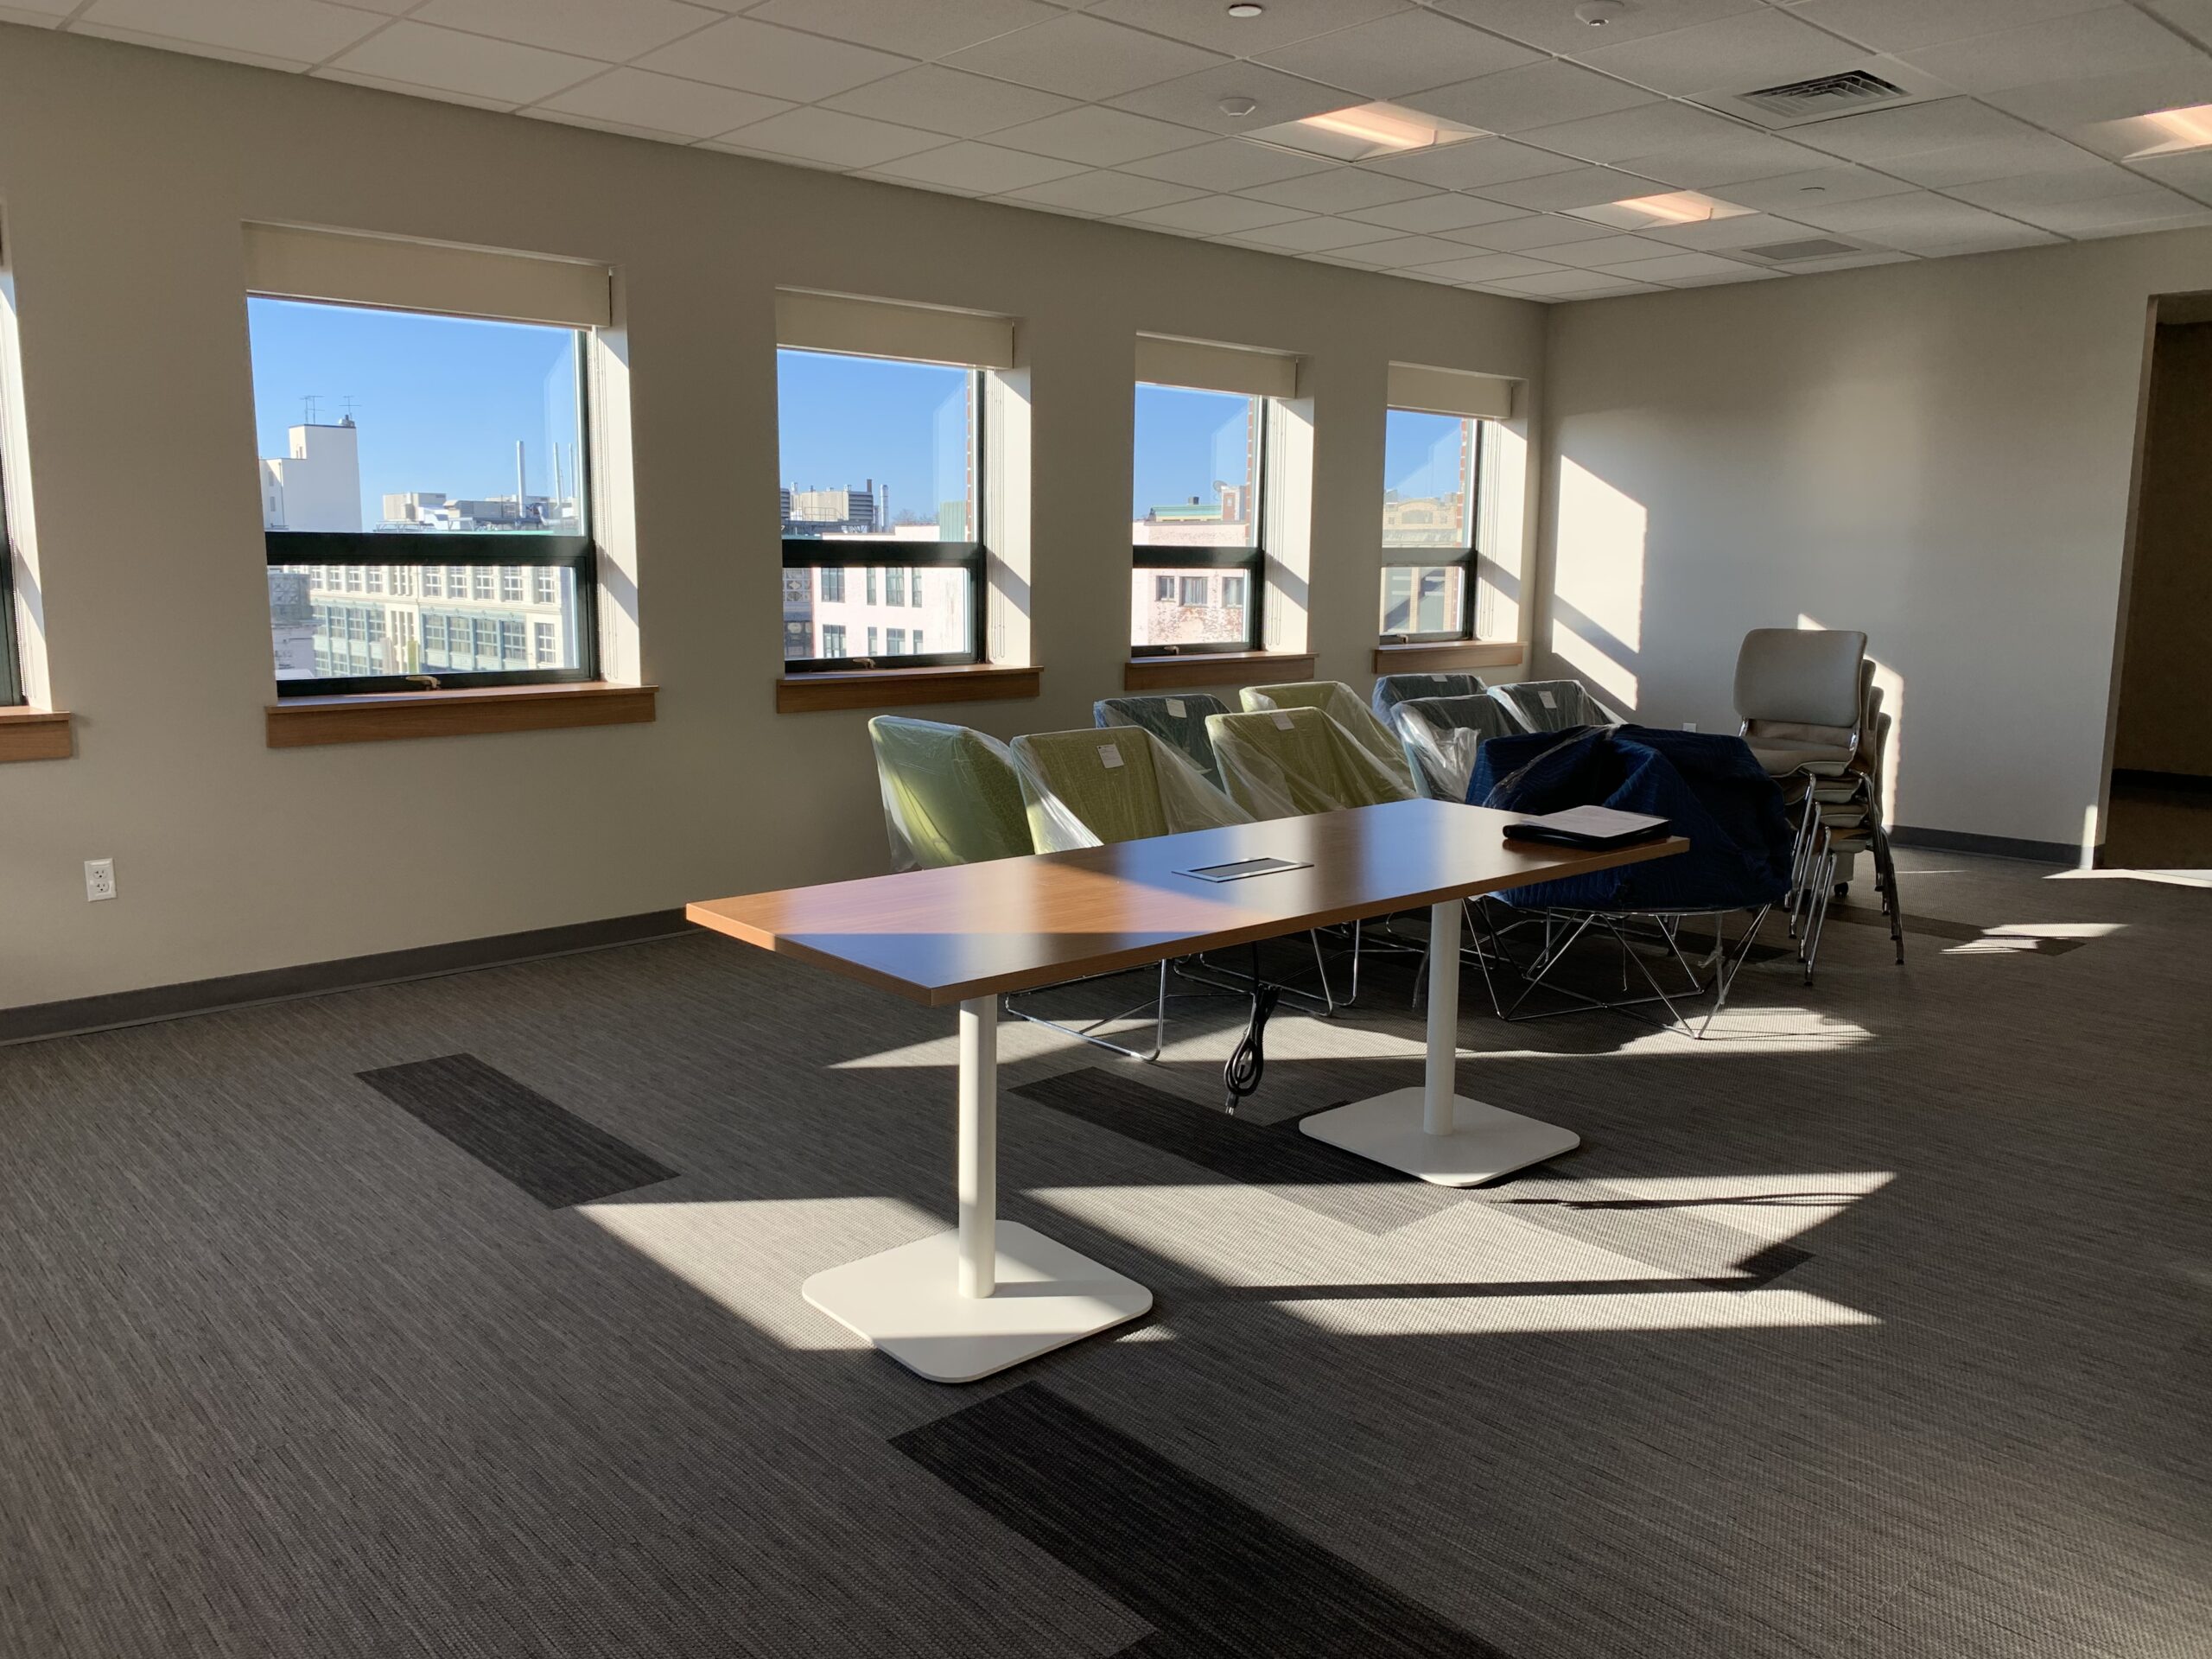 BCC New Bedford – Learning Commons